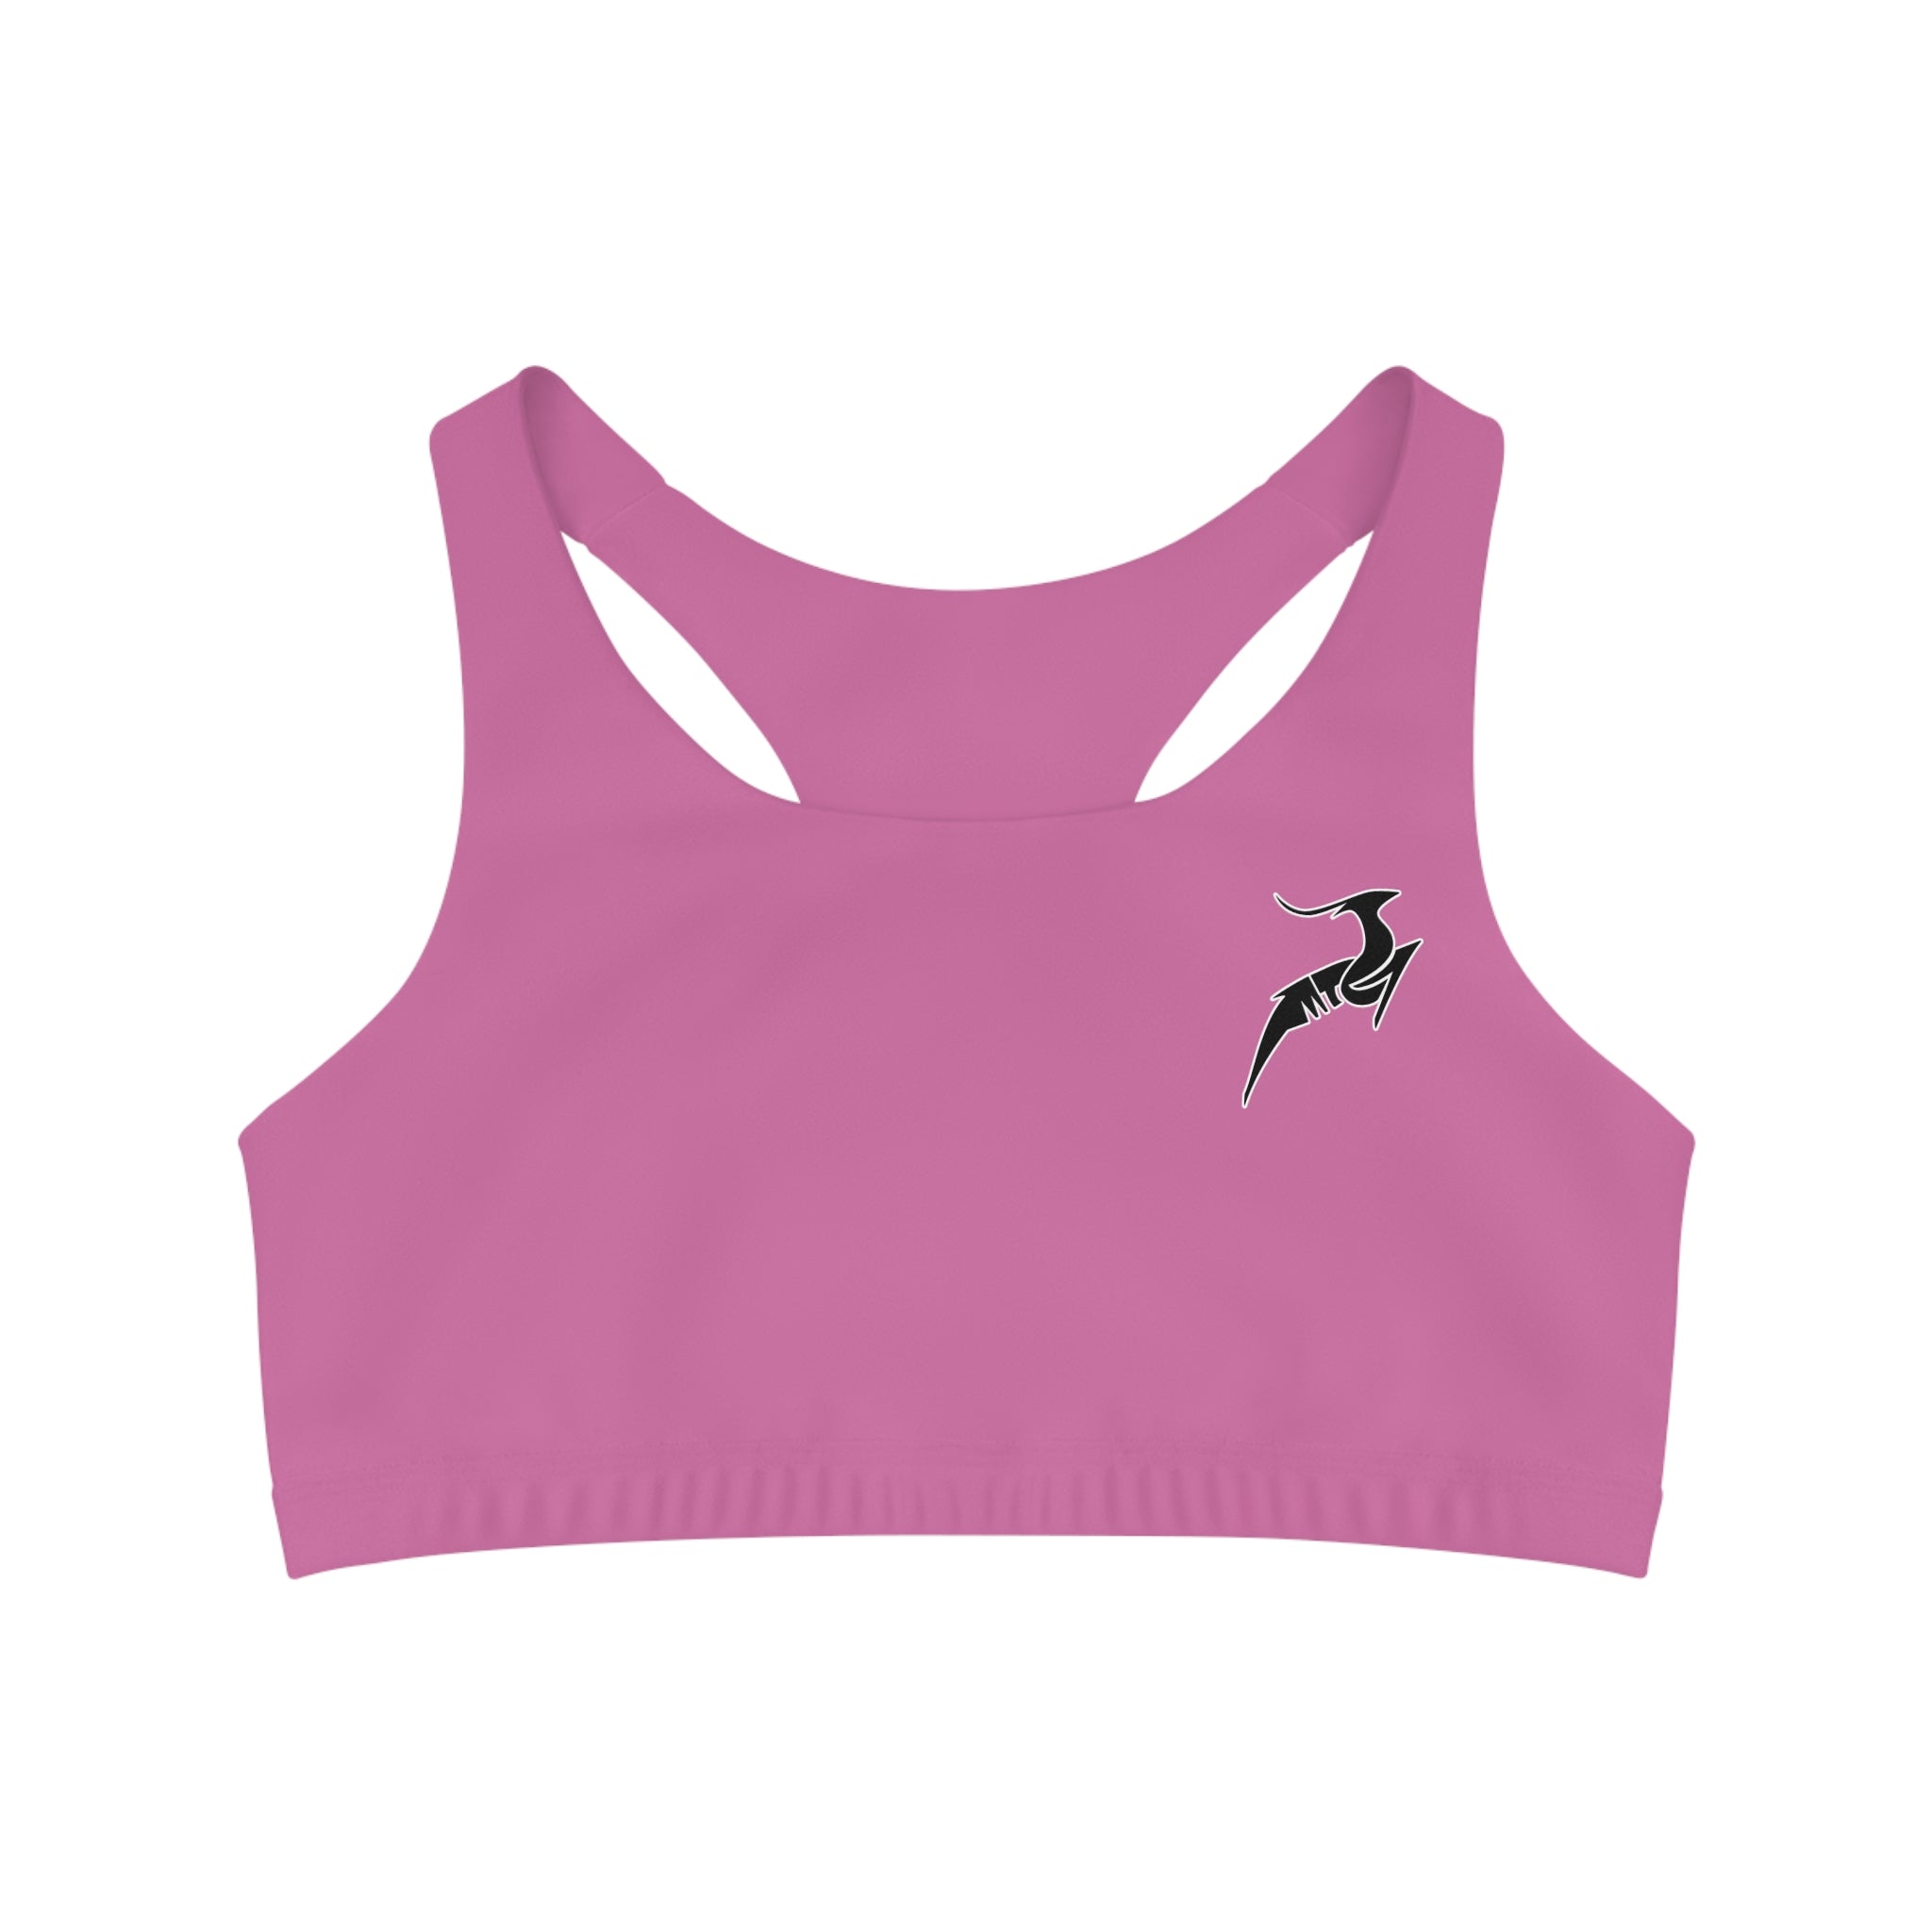 Shyle L Fluorescent Pink Sports Bra Price Starting From Rs 939. Find  Verified Sellers in Ludhiana - JdMart